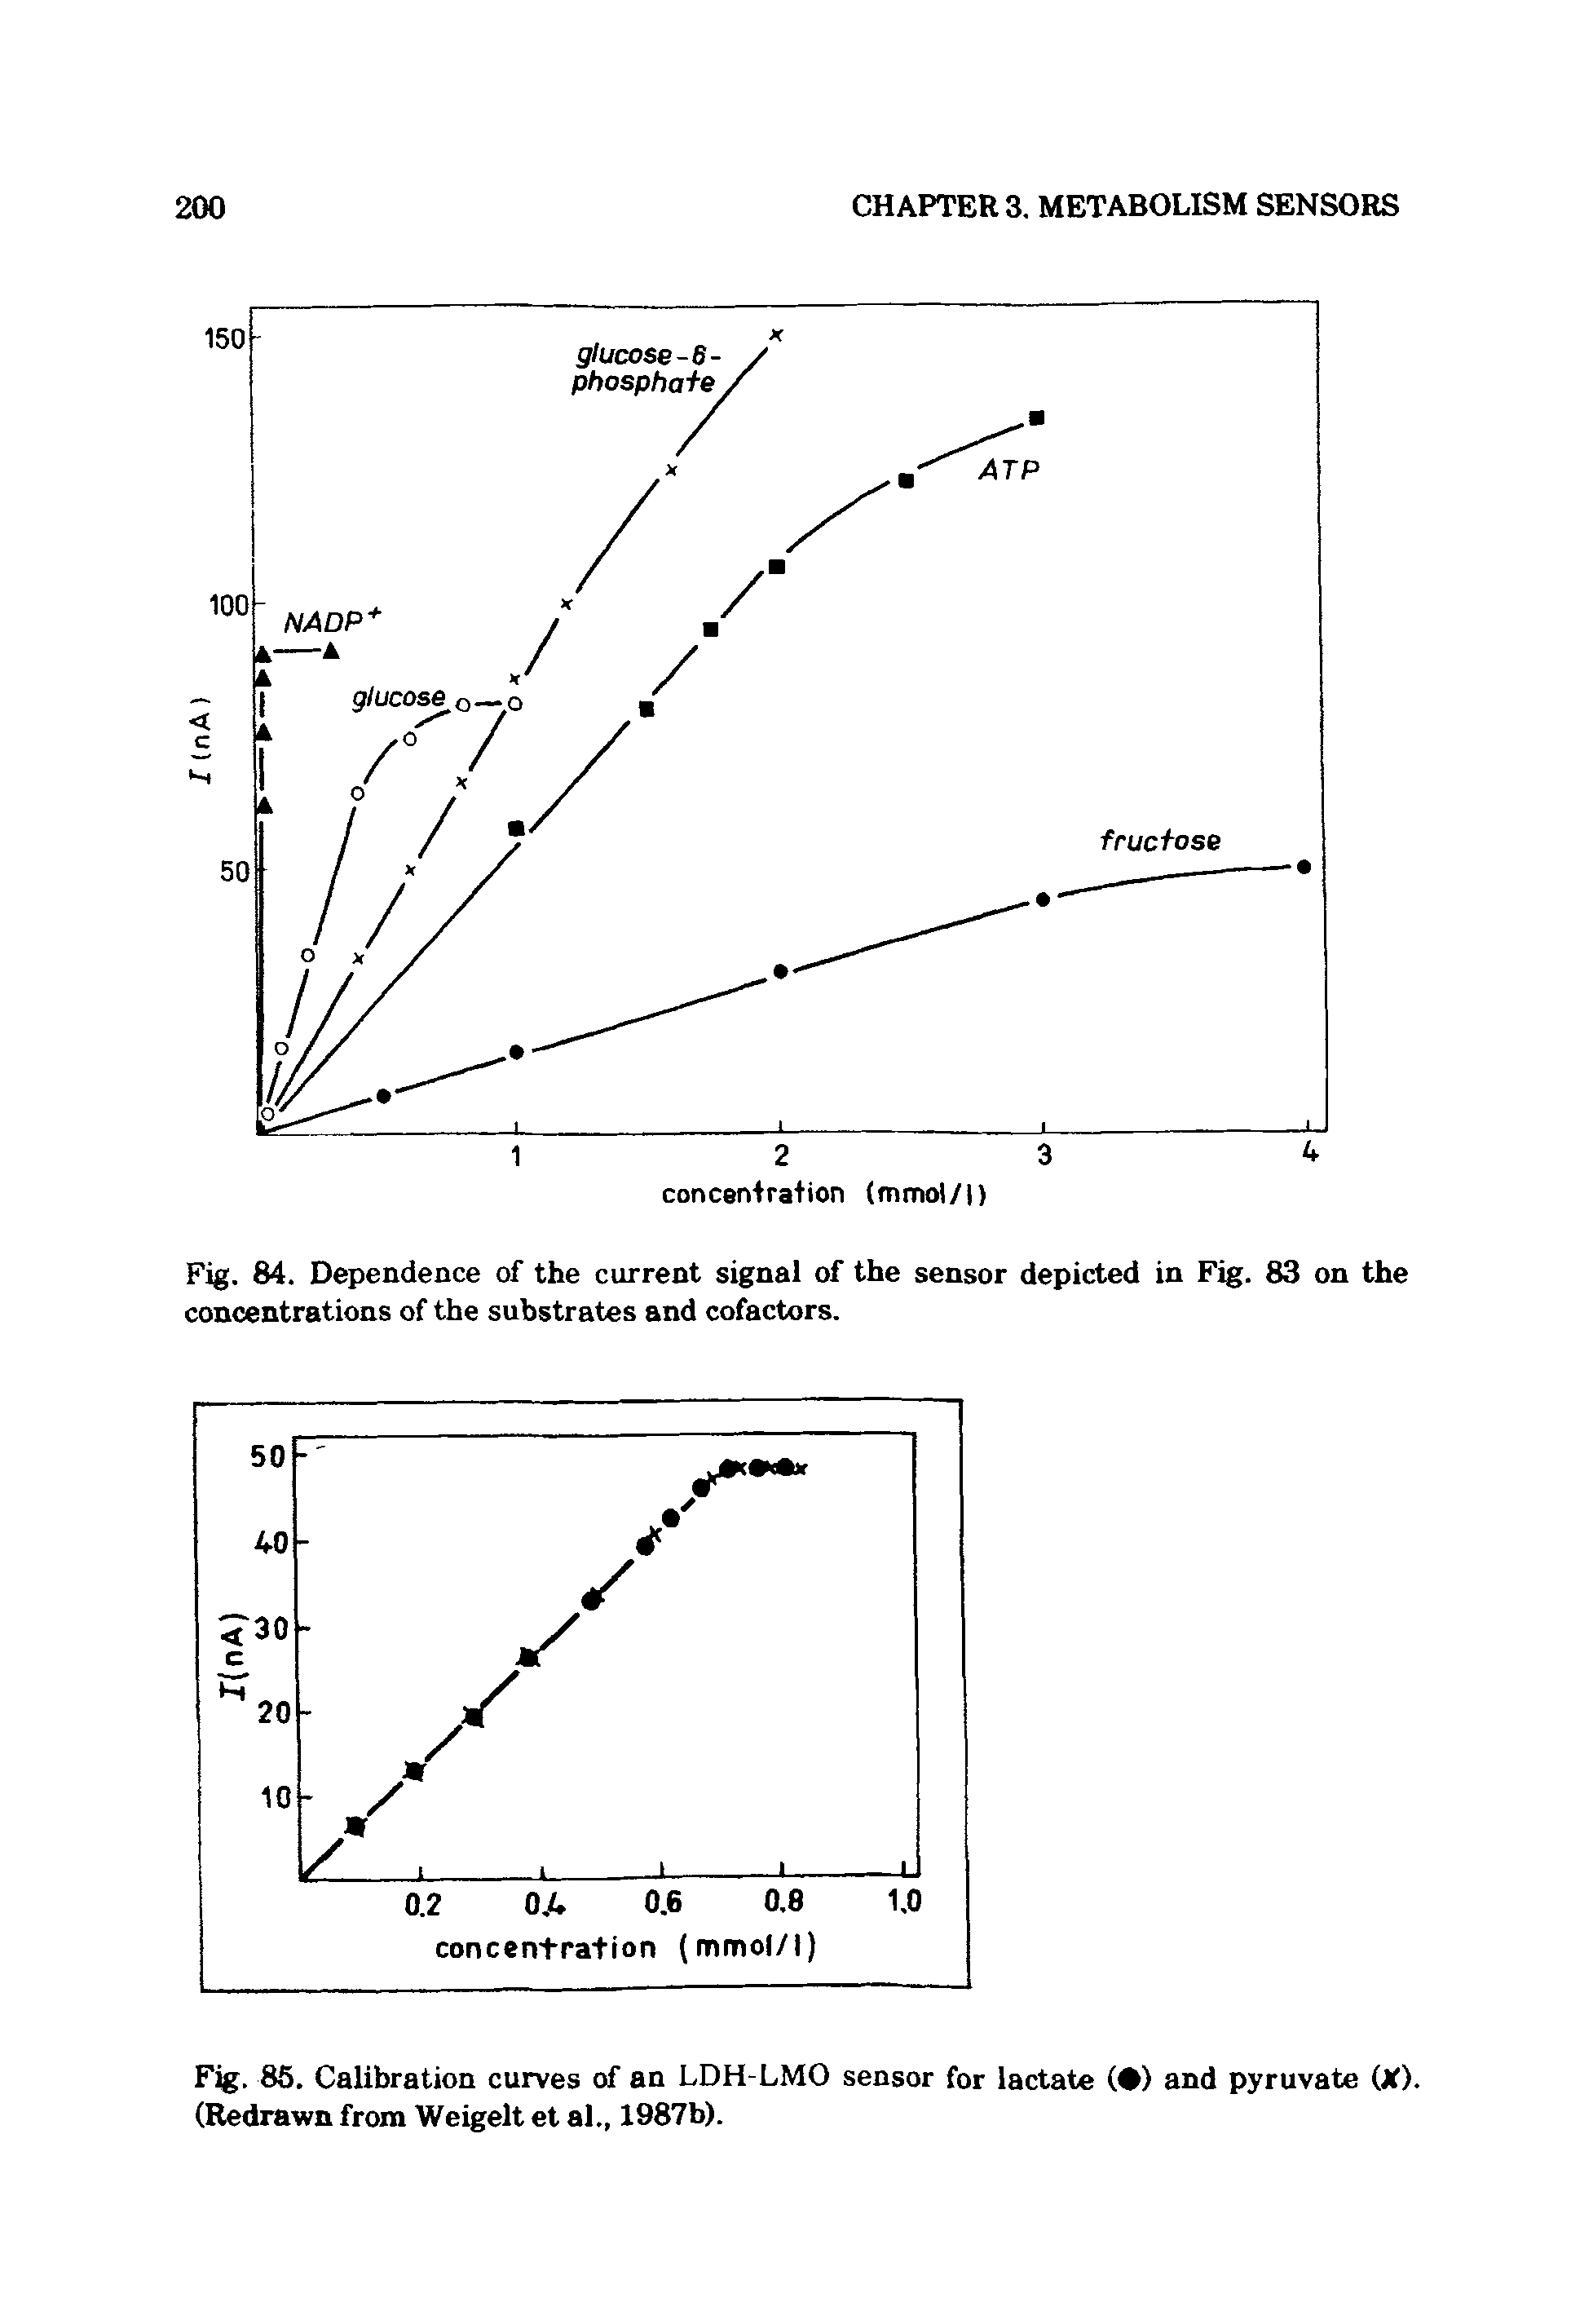 Fig. 85. Calibration curves of an LDH-LMO sensor for lactate ( ) and pyruvate (X). (Redrawn from Weigelt et al., 1987b).